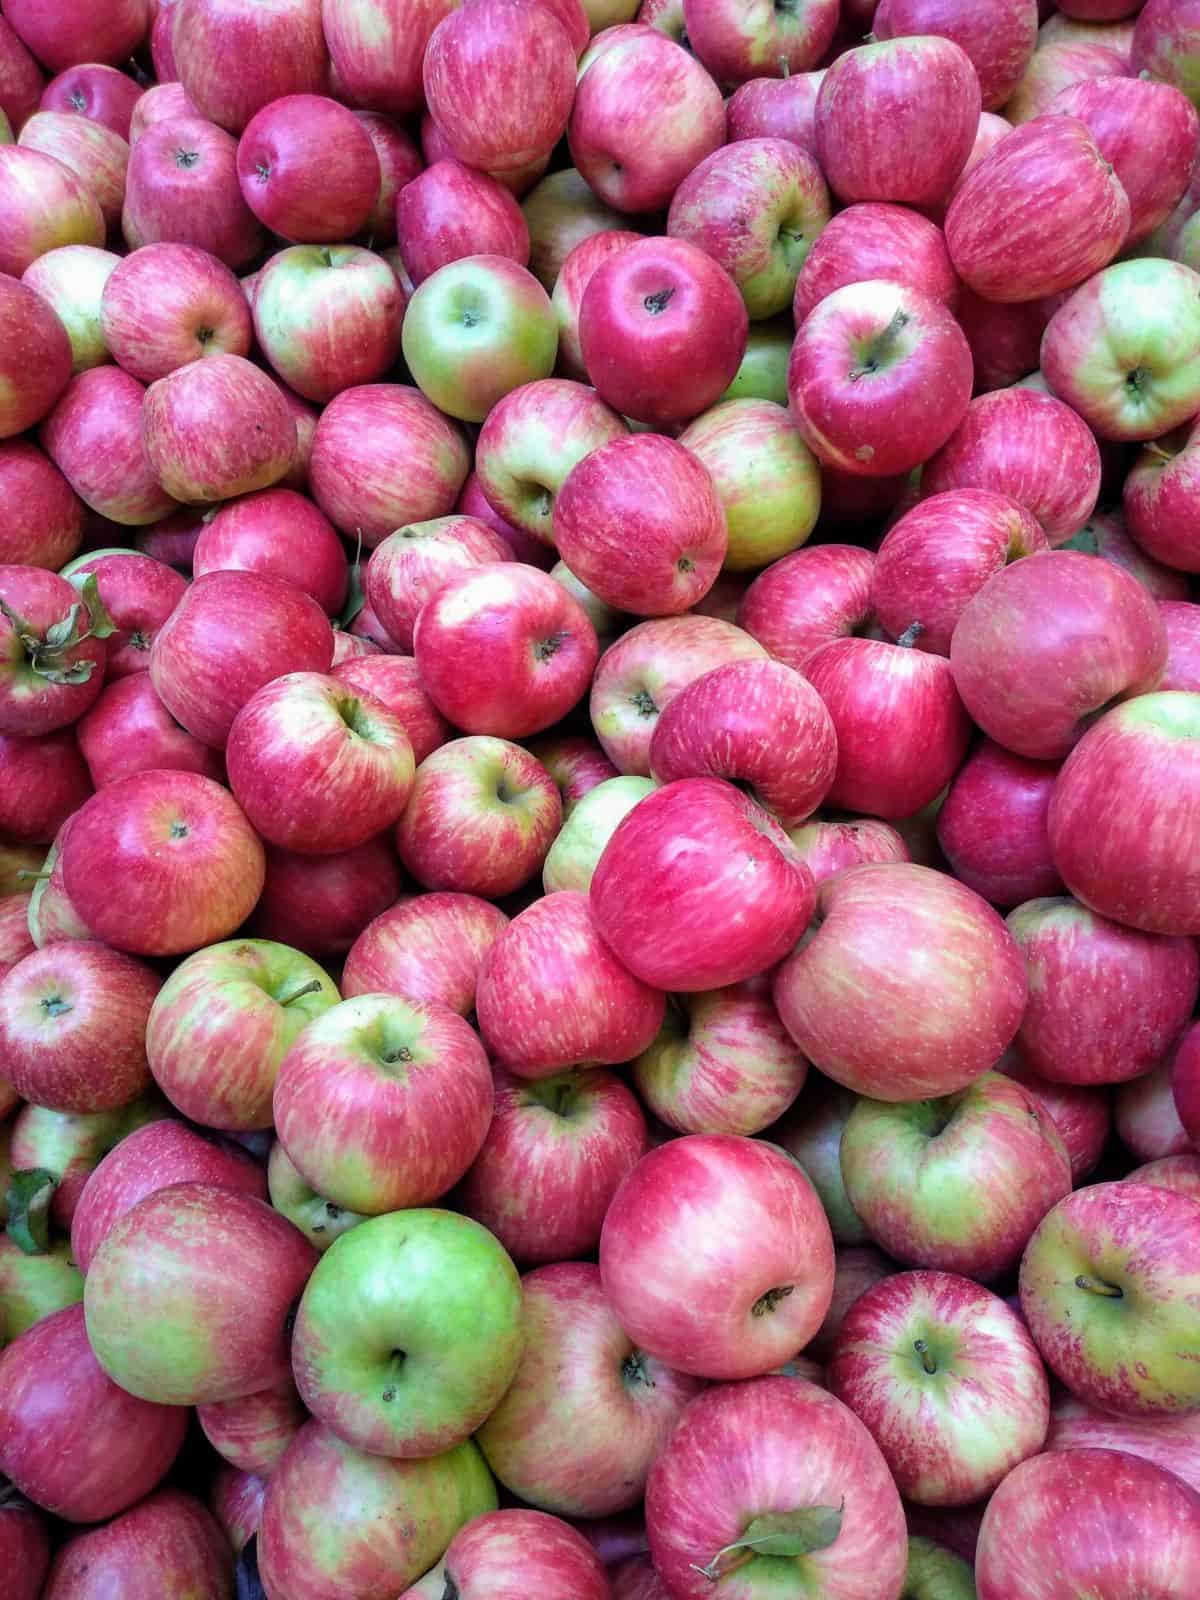 A close up of a bin filled with Honeycrisp apples.